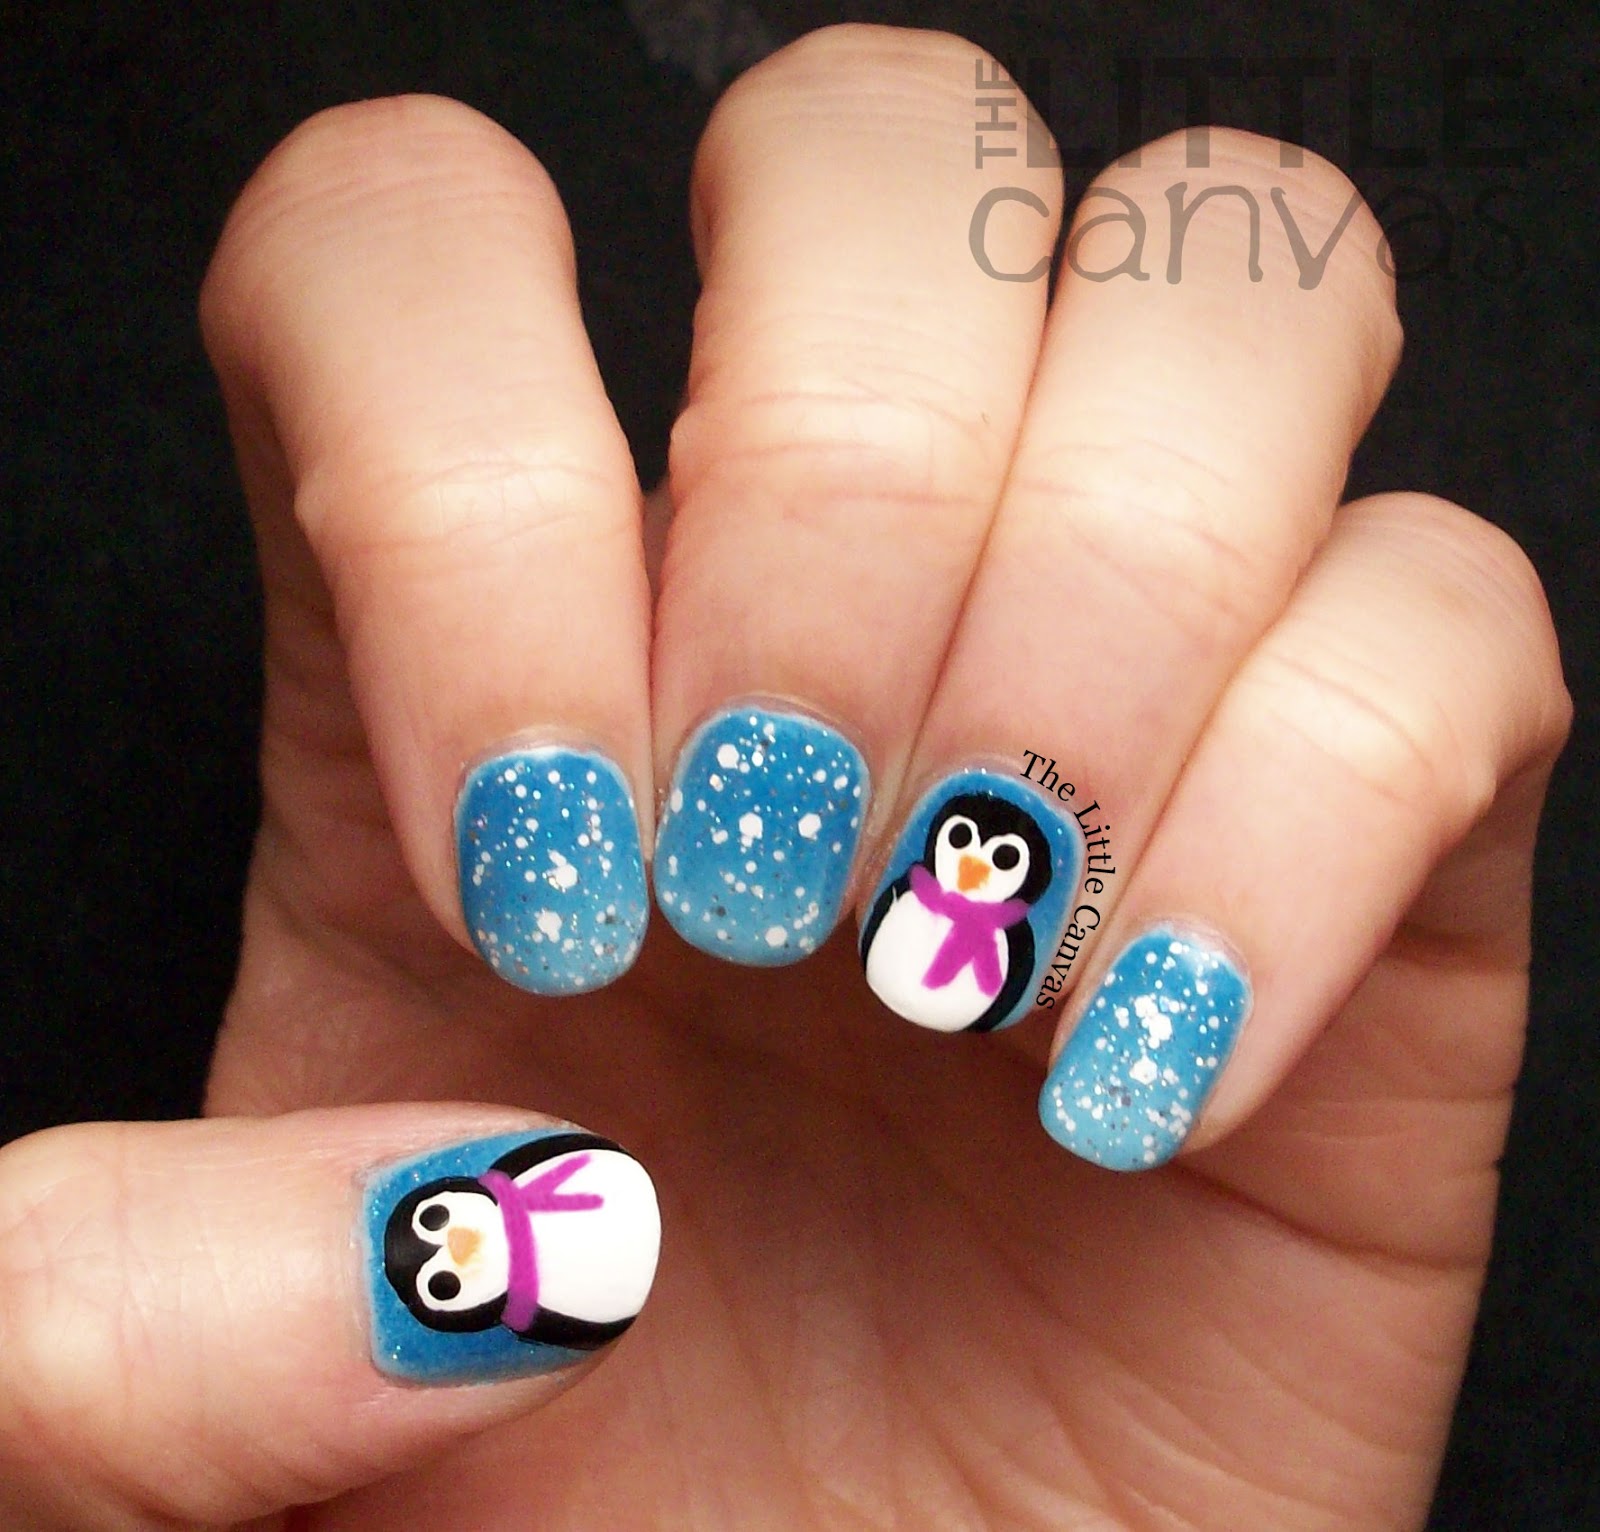 The First Snowy Manicure of the Season - Penguin Nails! - The Little Canvas